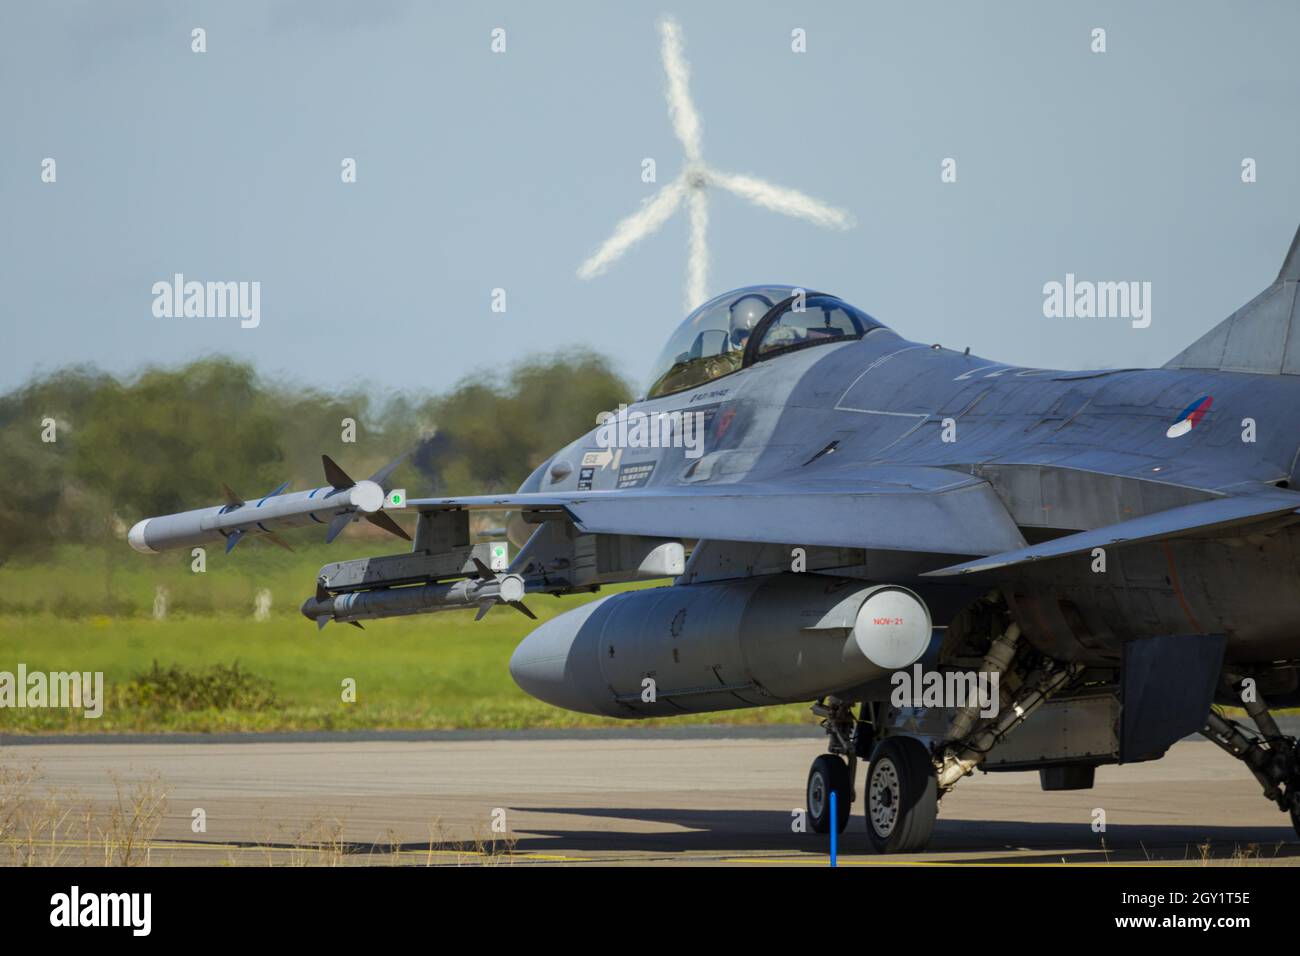 Leeuwarden Netherlands Oct. 4 2021 Weapon Instructor Course F-16 preparing for take off Stock Photo